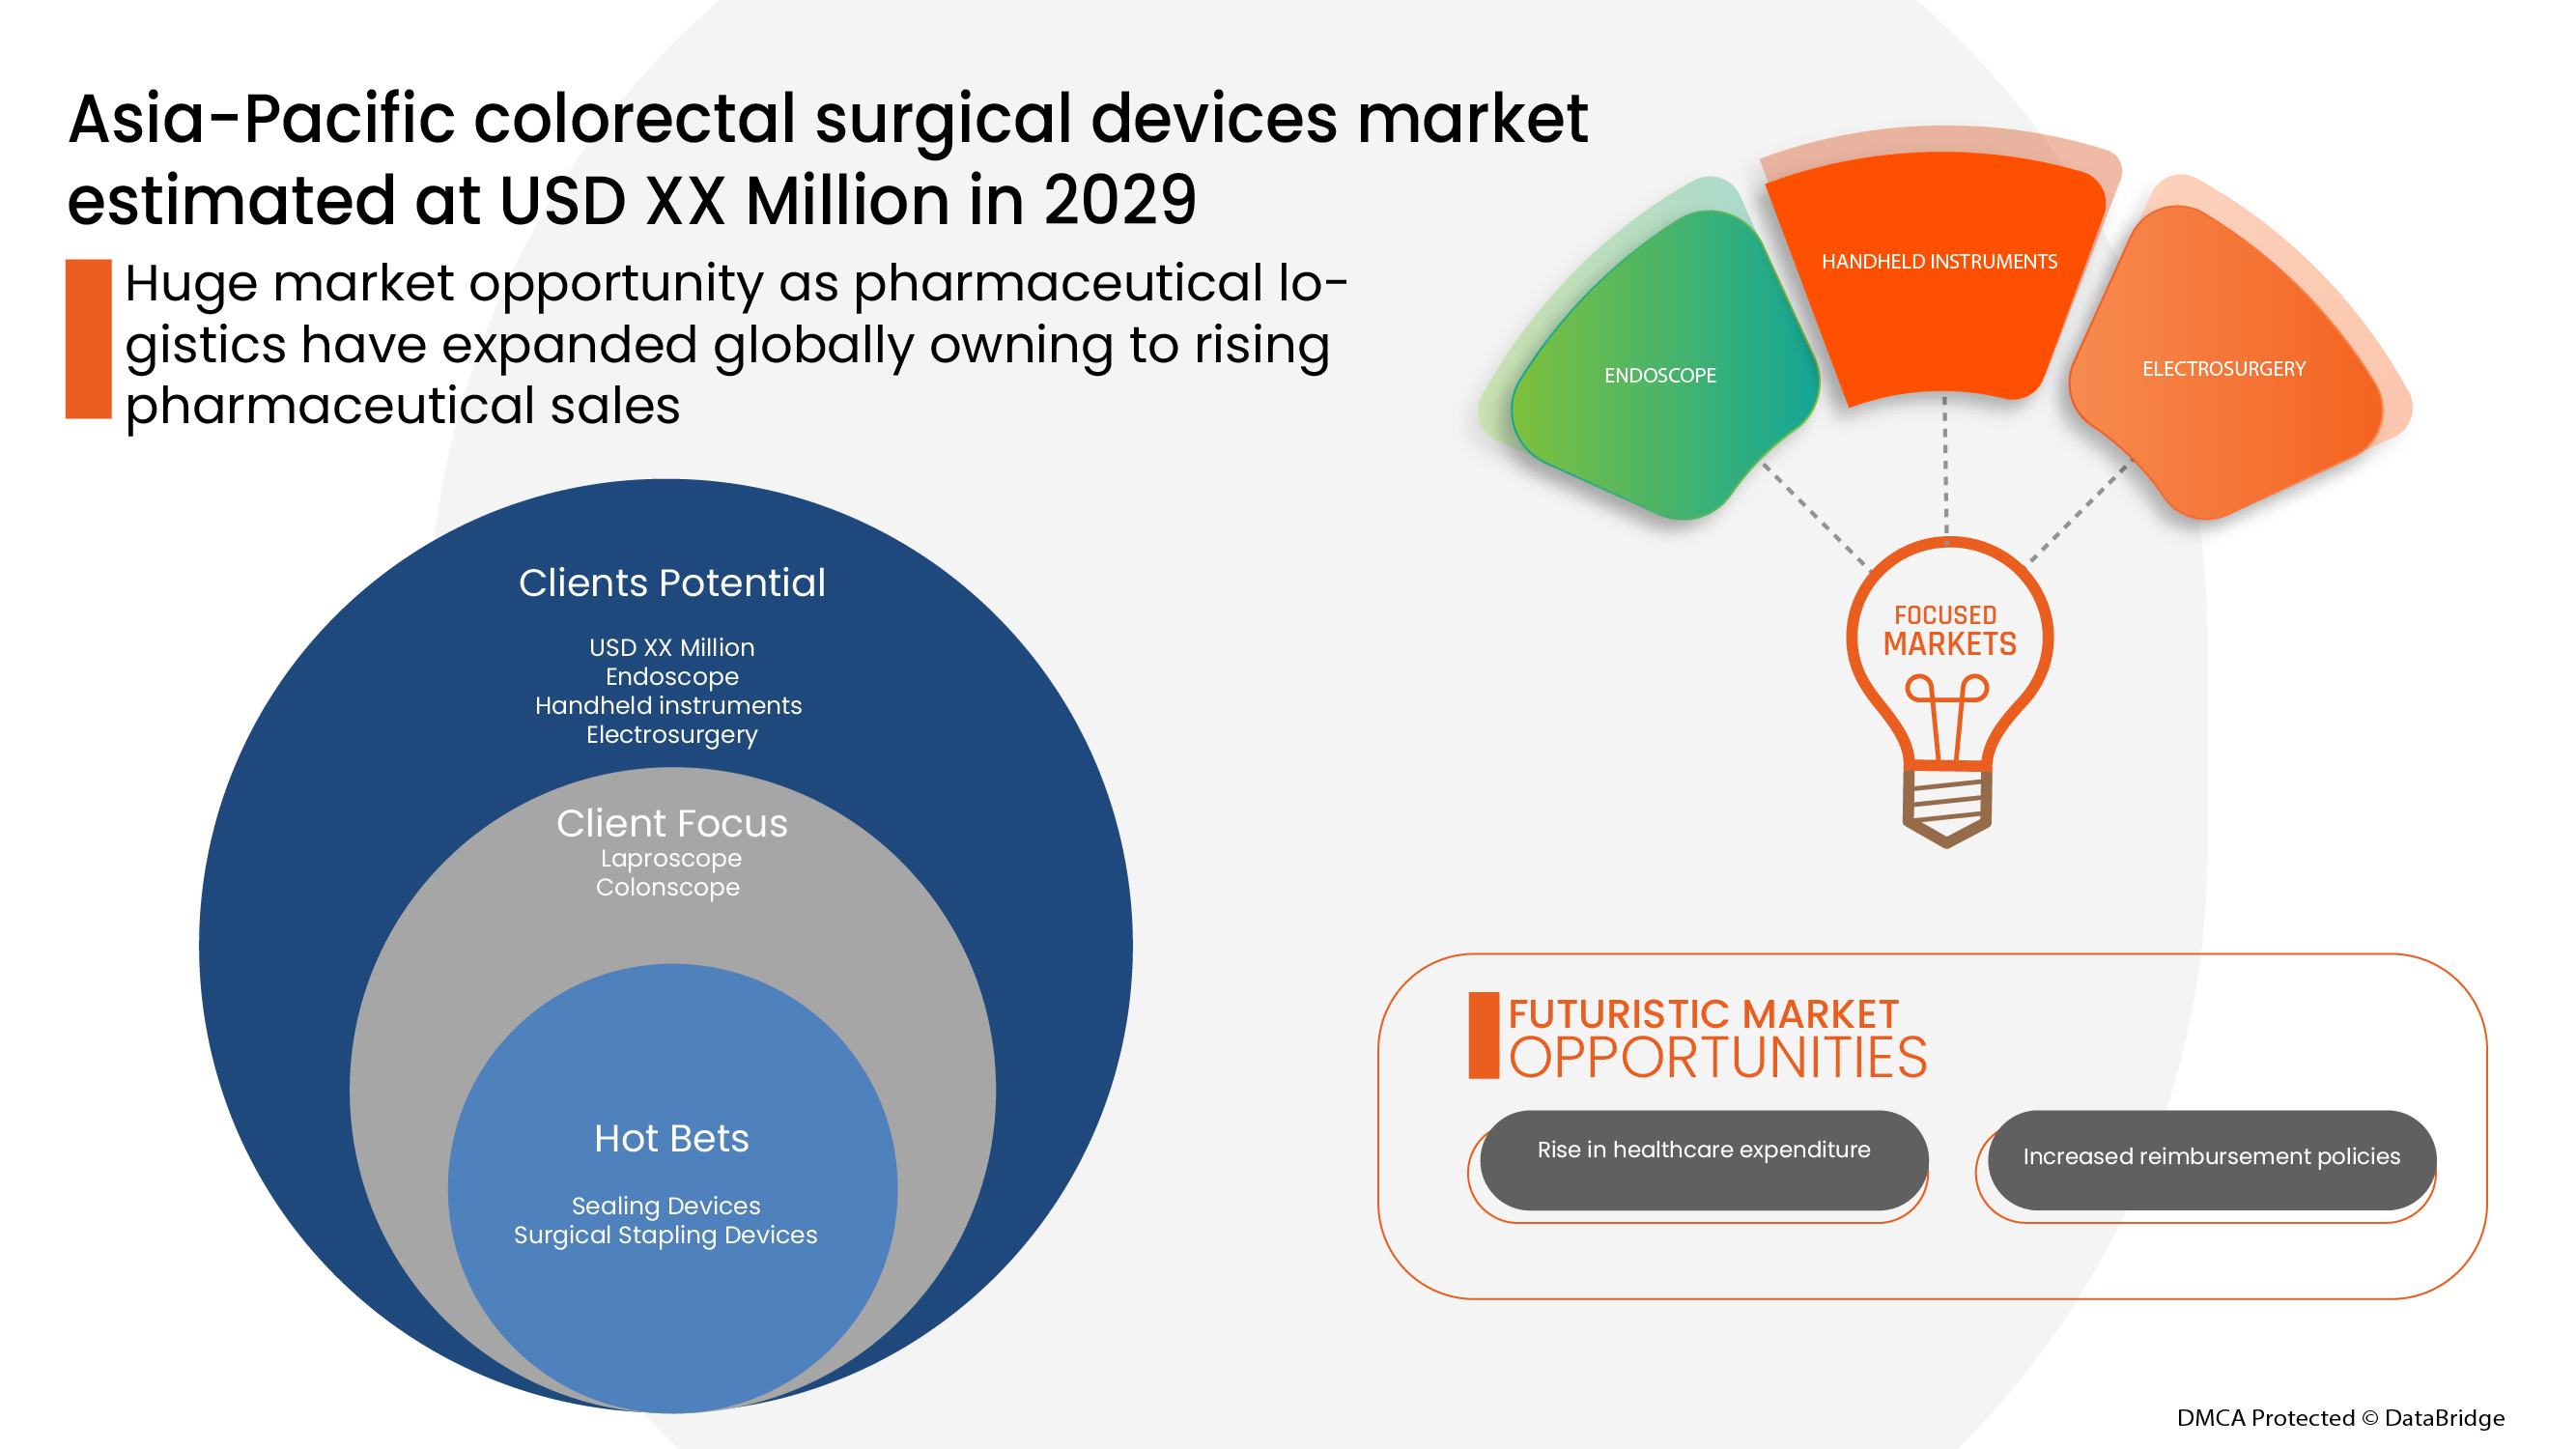 Asia-Pacific Colorectal Surgical Devices Market